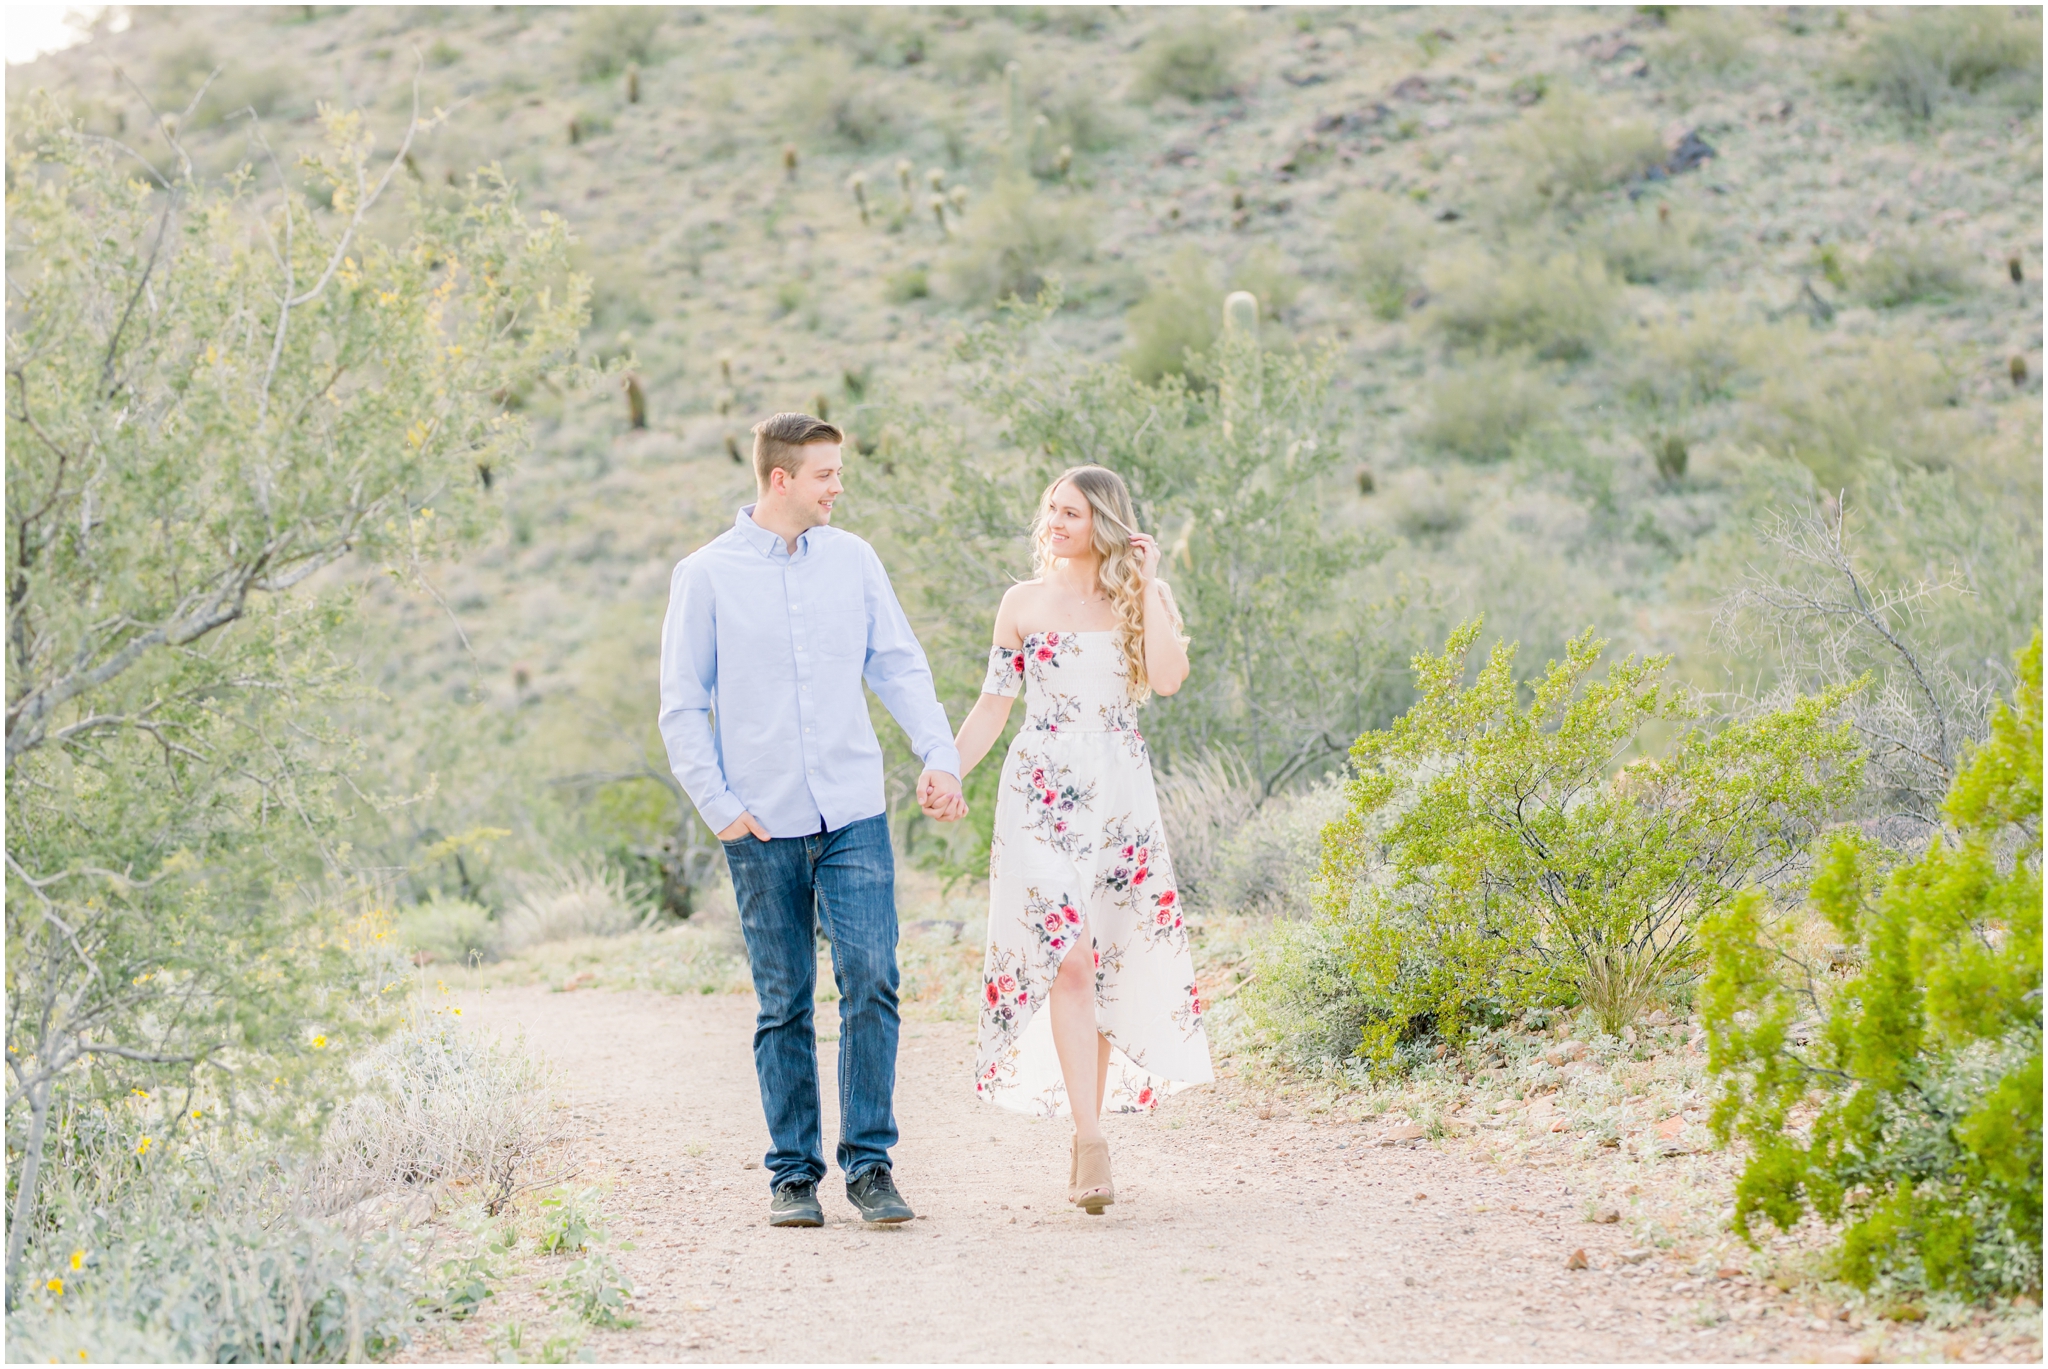 Lost Dog Trail Engagement, white floral dress, blue shirt and jeans